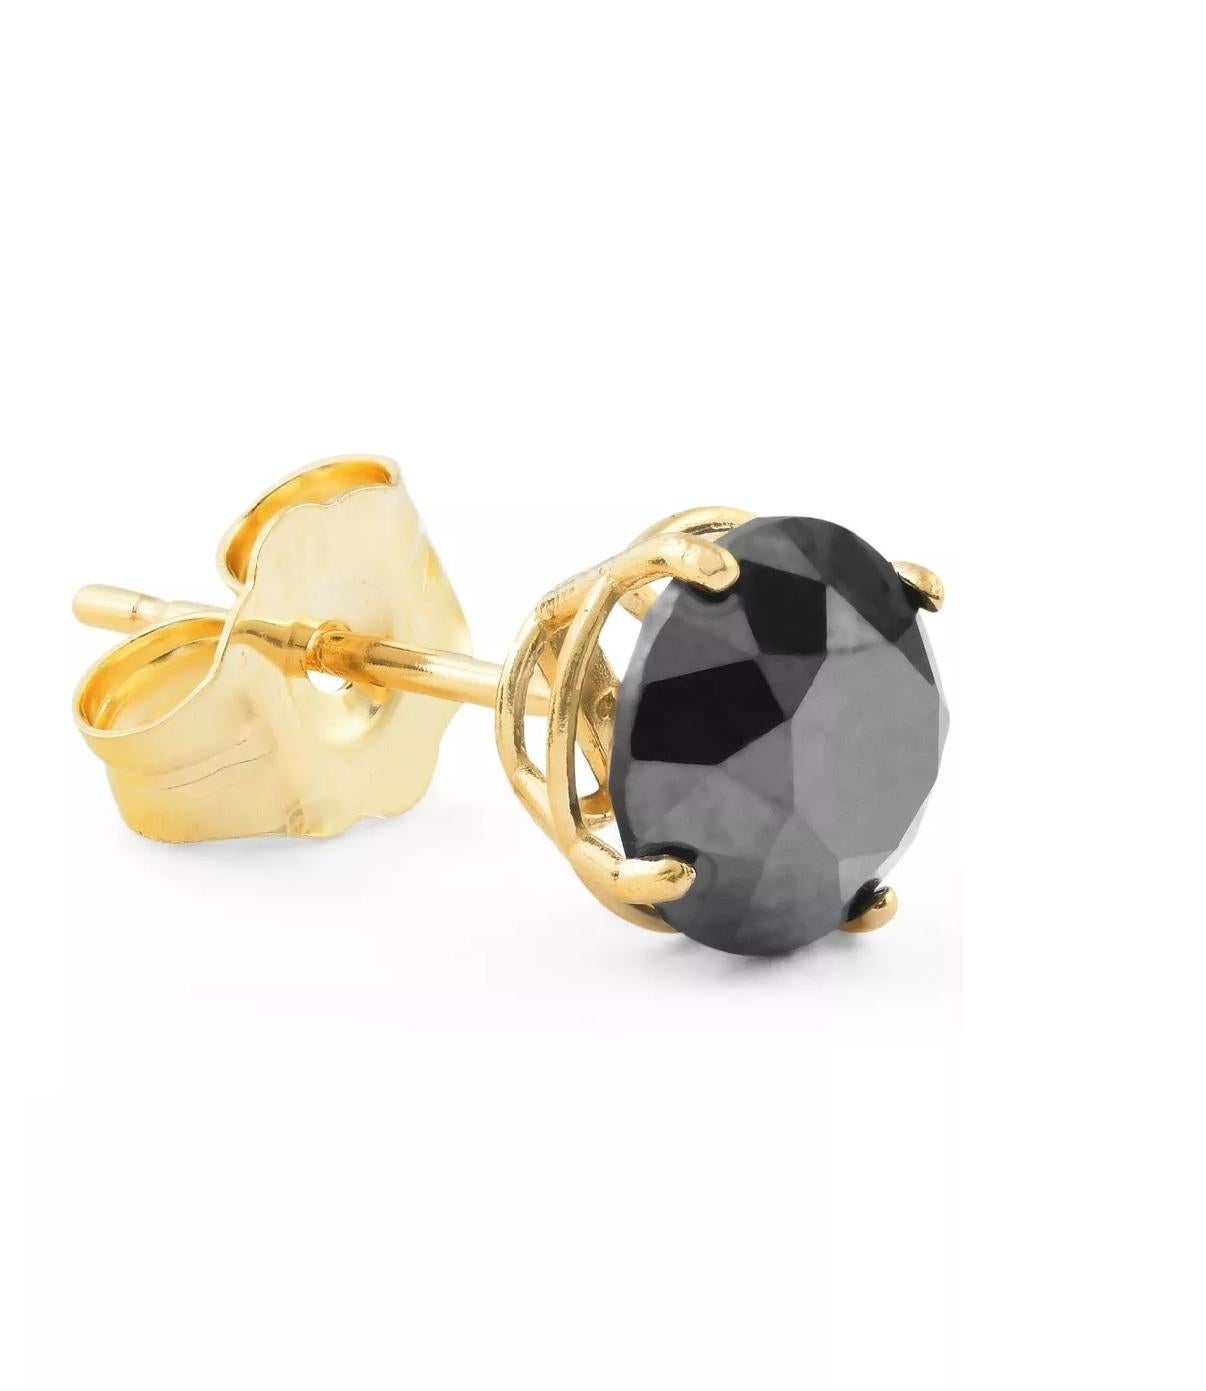 Round Cut 0.88 Carat Total Round Black Diamond Solitaire Stud Earrings in 14 K Yellow Gold